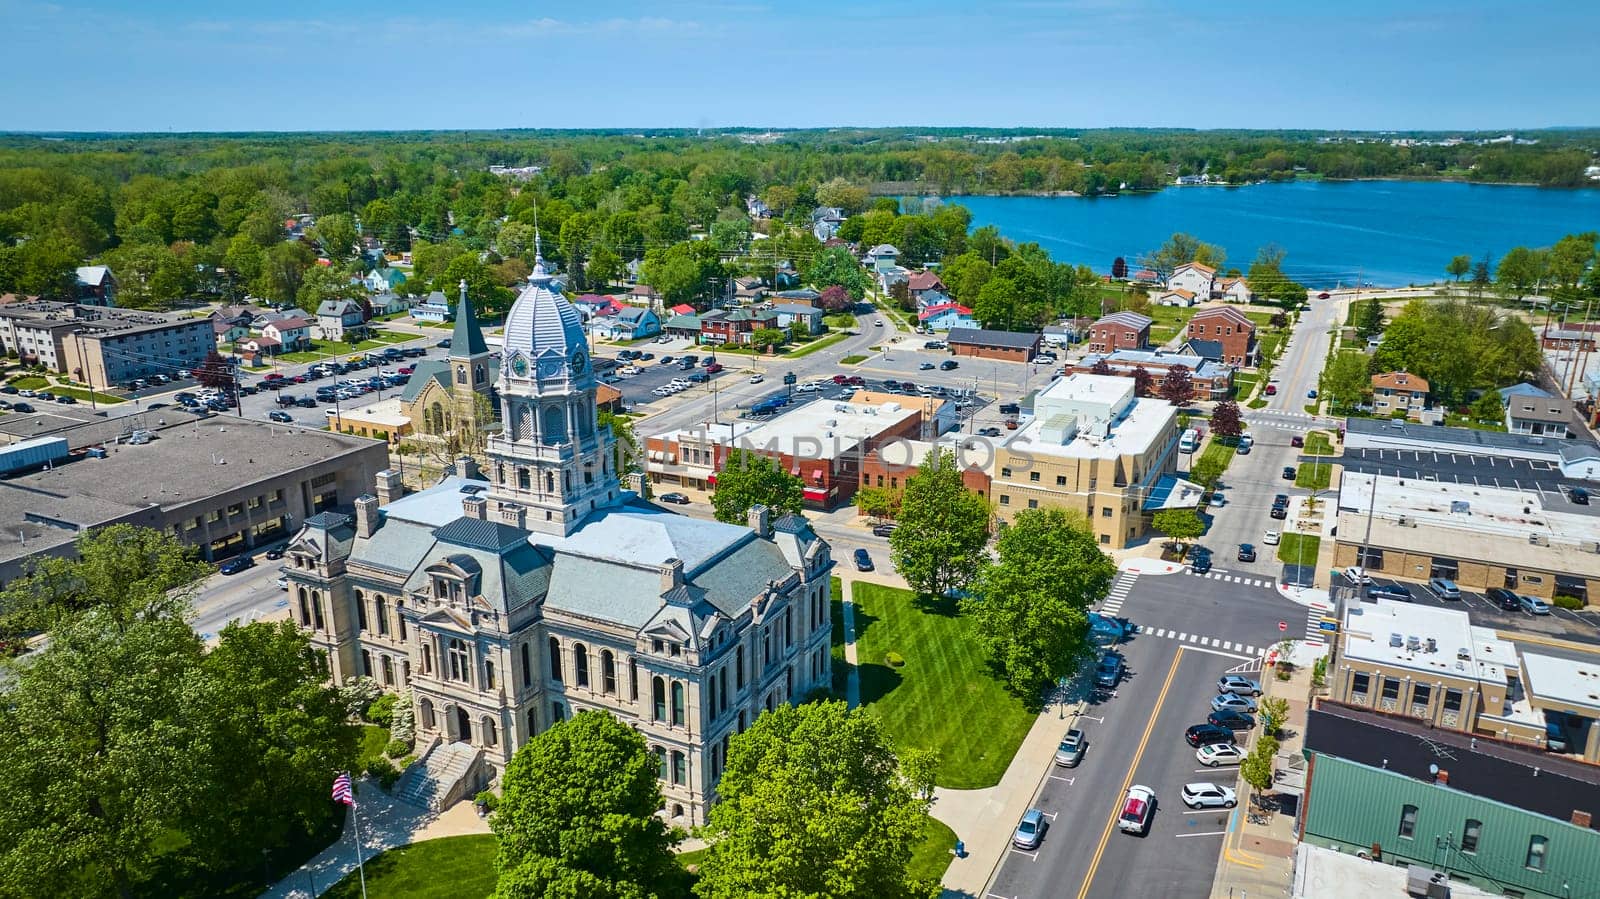 Aerial view of Warsaw, Indiana: Historic courthouse and scenic river illustrate a harmonious blend of tradition and community.